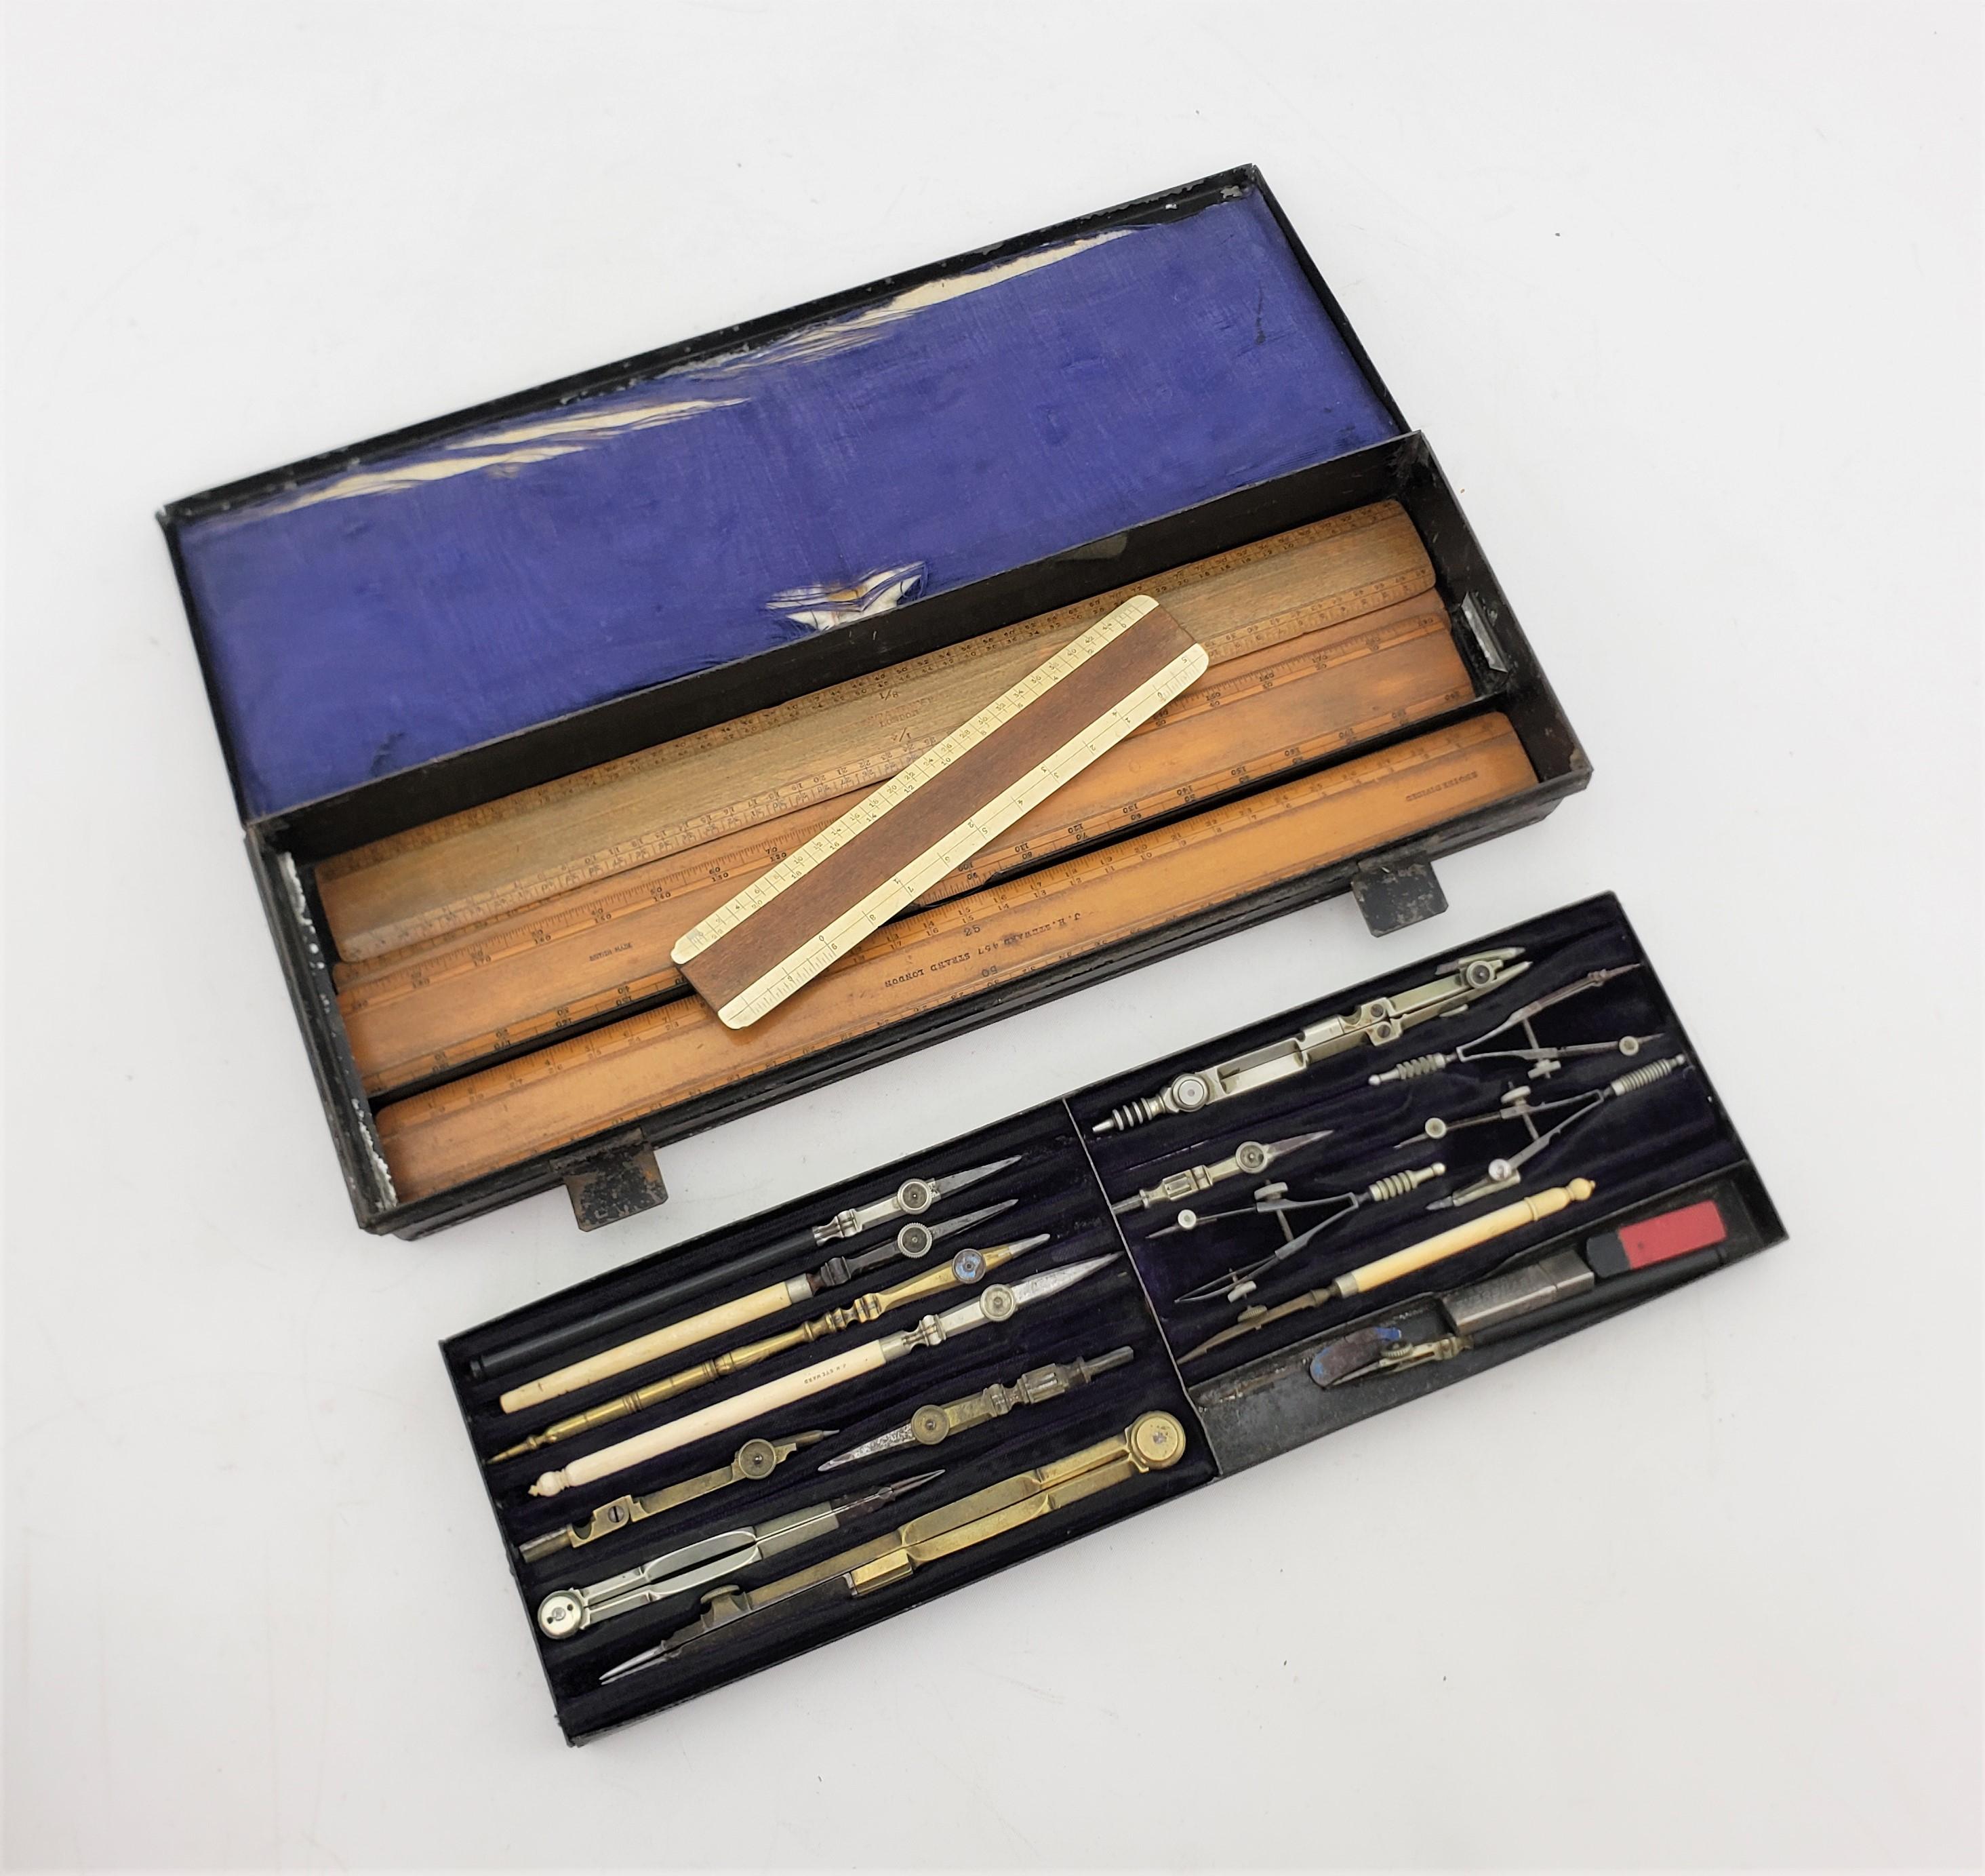 This large and substantial antique mechanical drafting set most likely originates from Germany and dates to approximately 1900 and done in the period Edwardian style. The set is composed of several wooden rulers and various compasses and dividers of